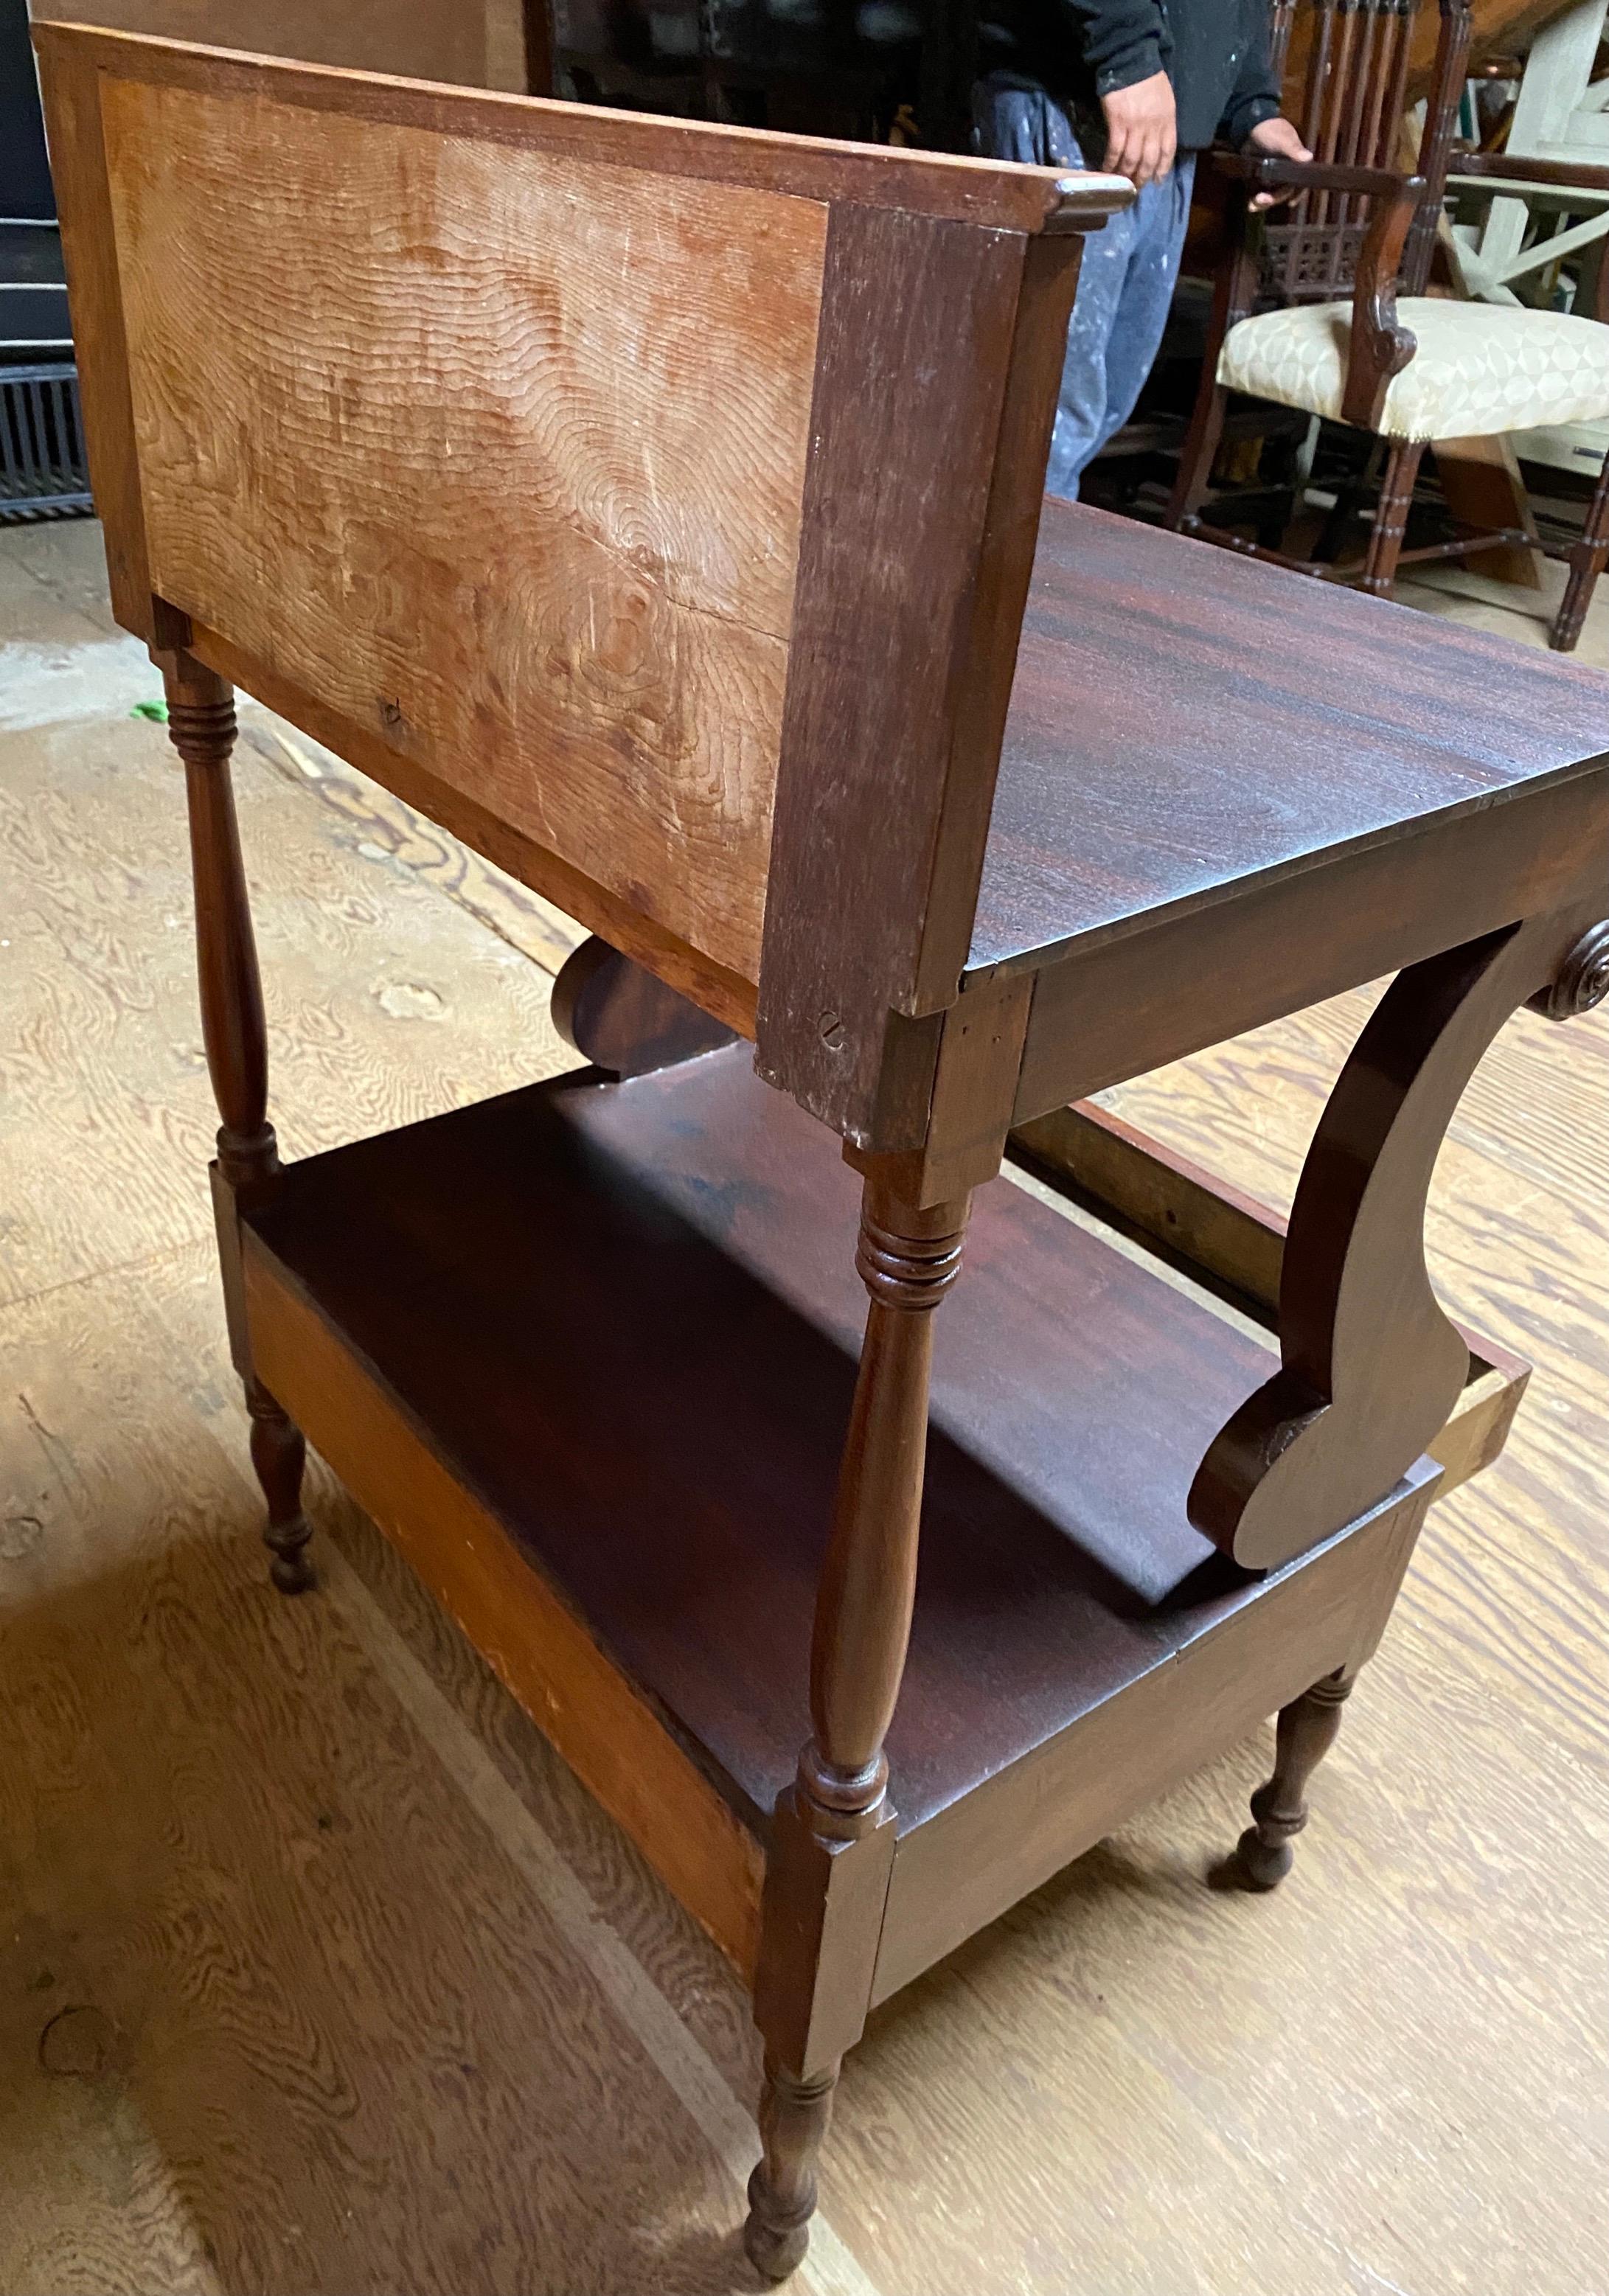 Hand-Crafted Antique Washstand